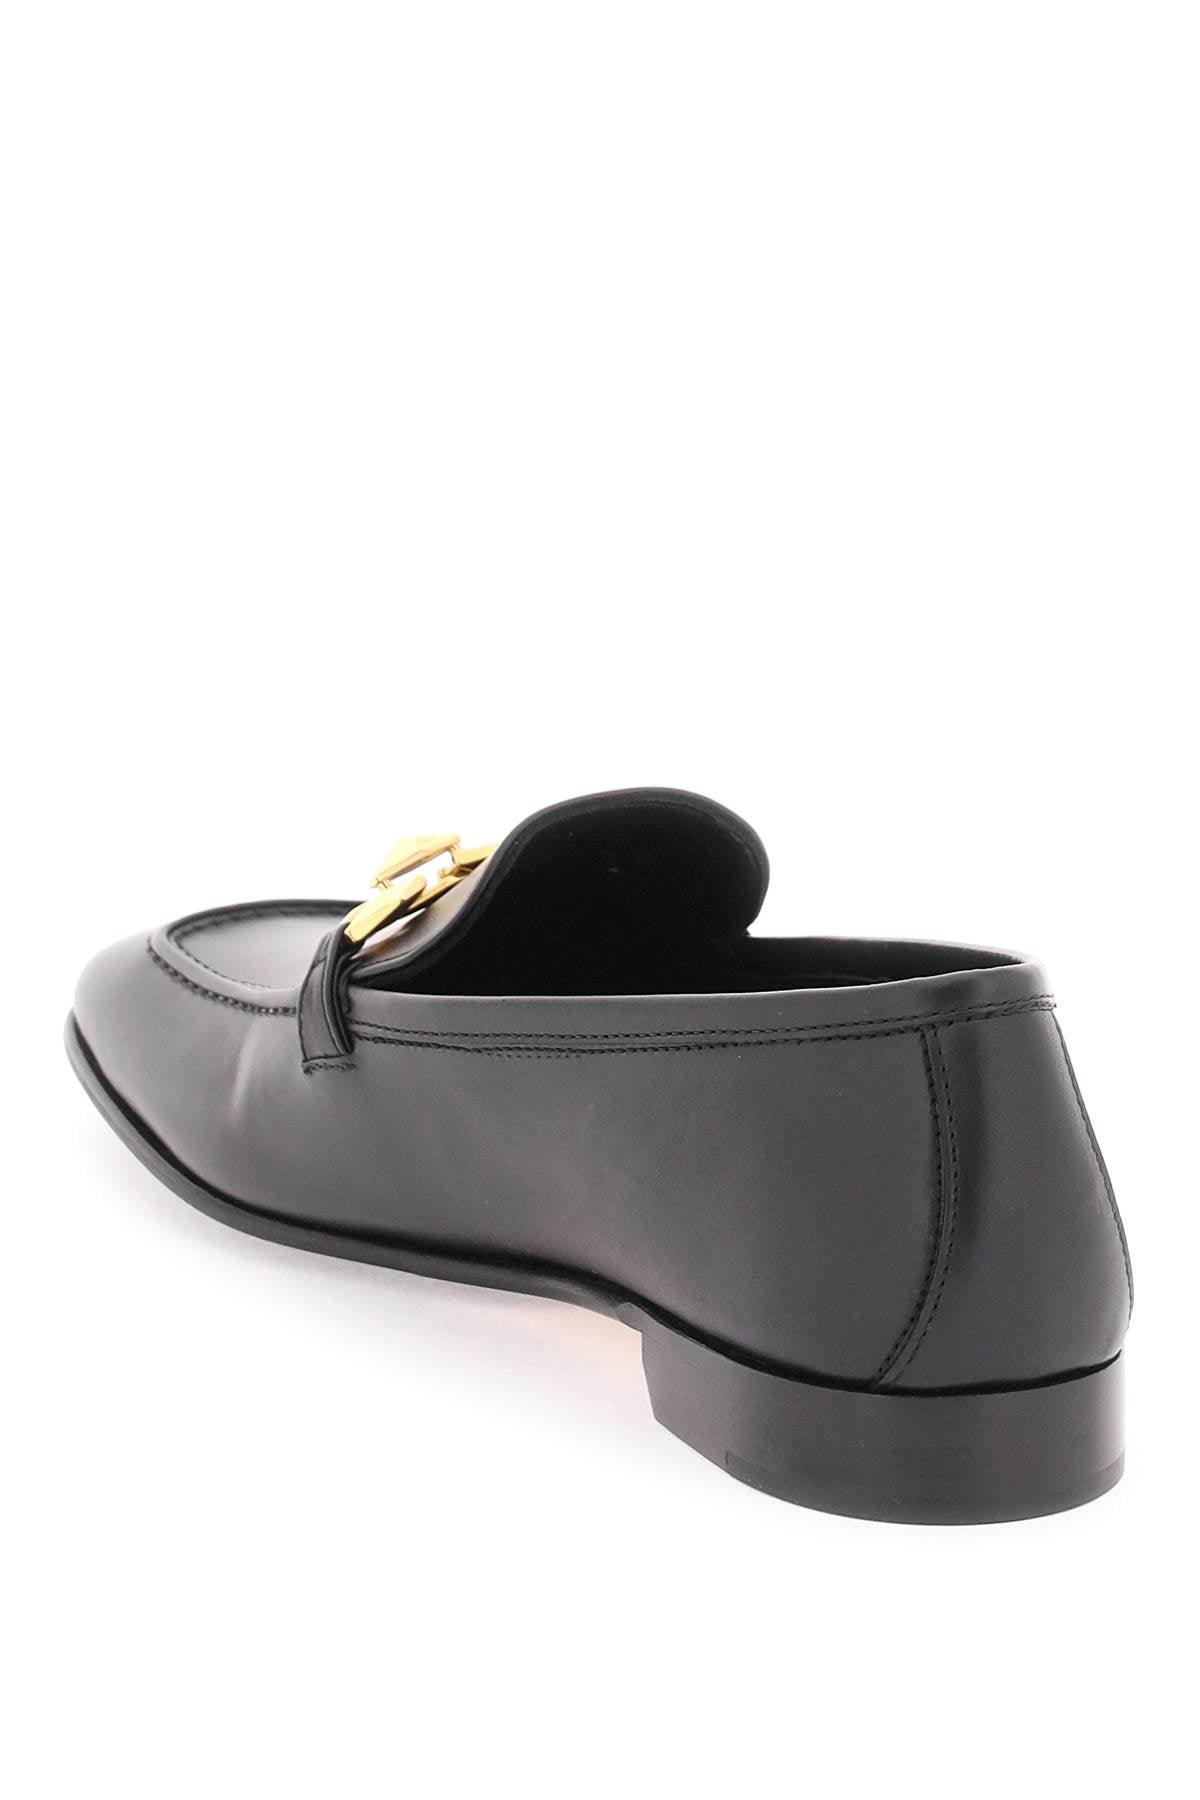 Faceted Chain Moccasins for Women in Black Leather